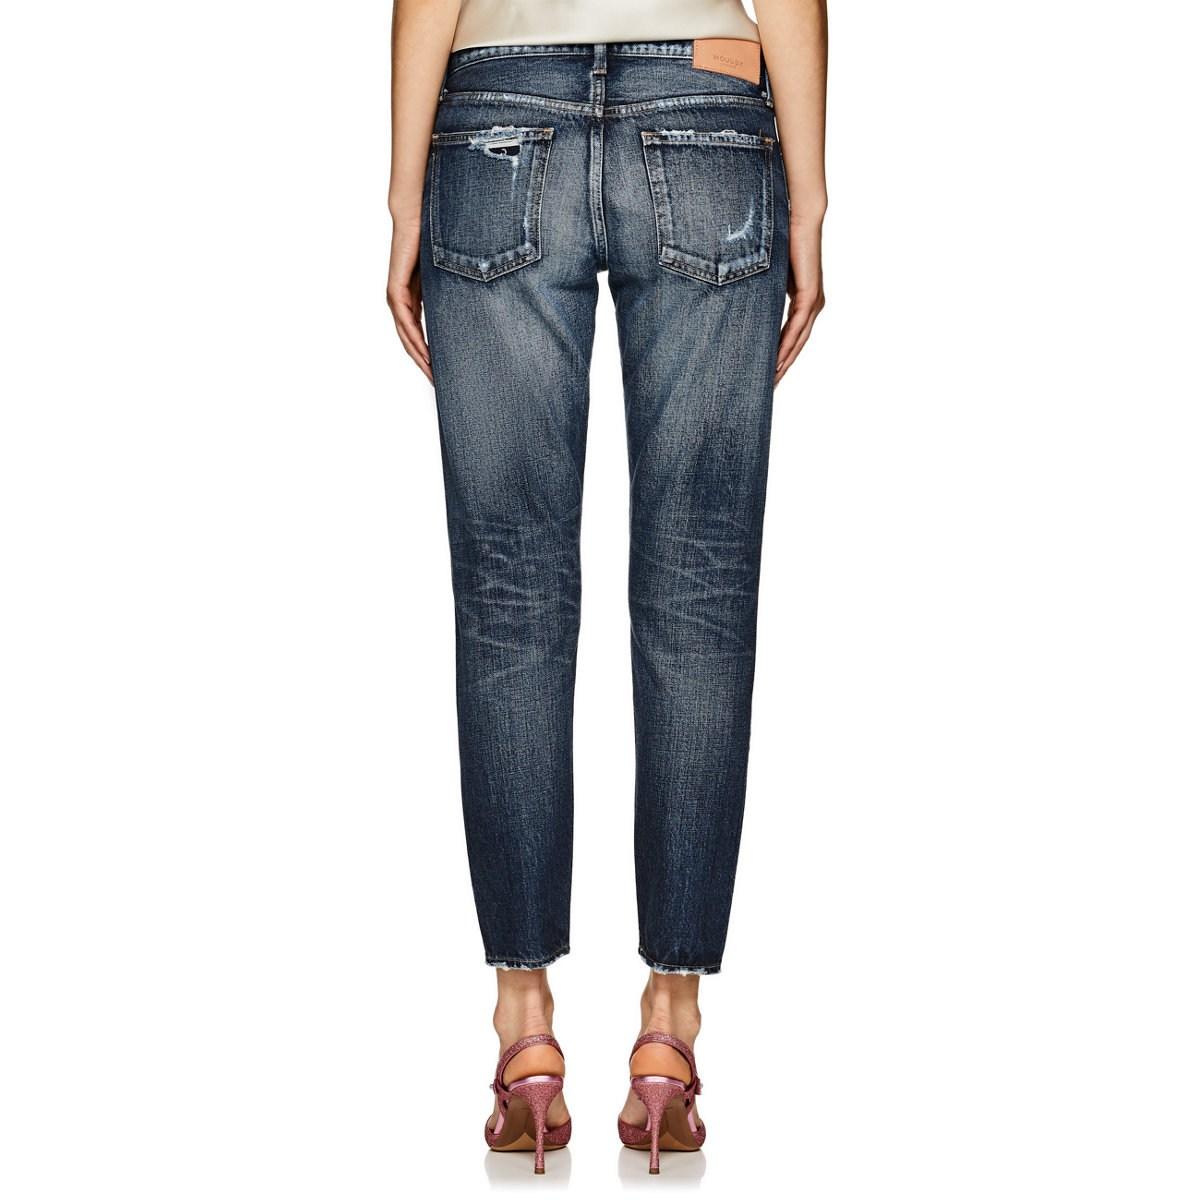 Moussy Denim Nelson Distressed Tapered Jeans in Blue - Lyst